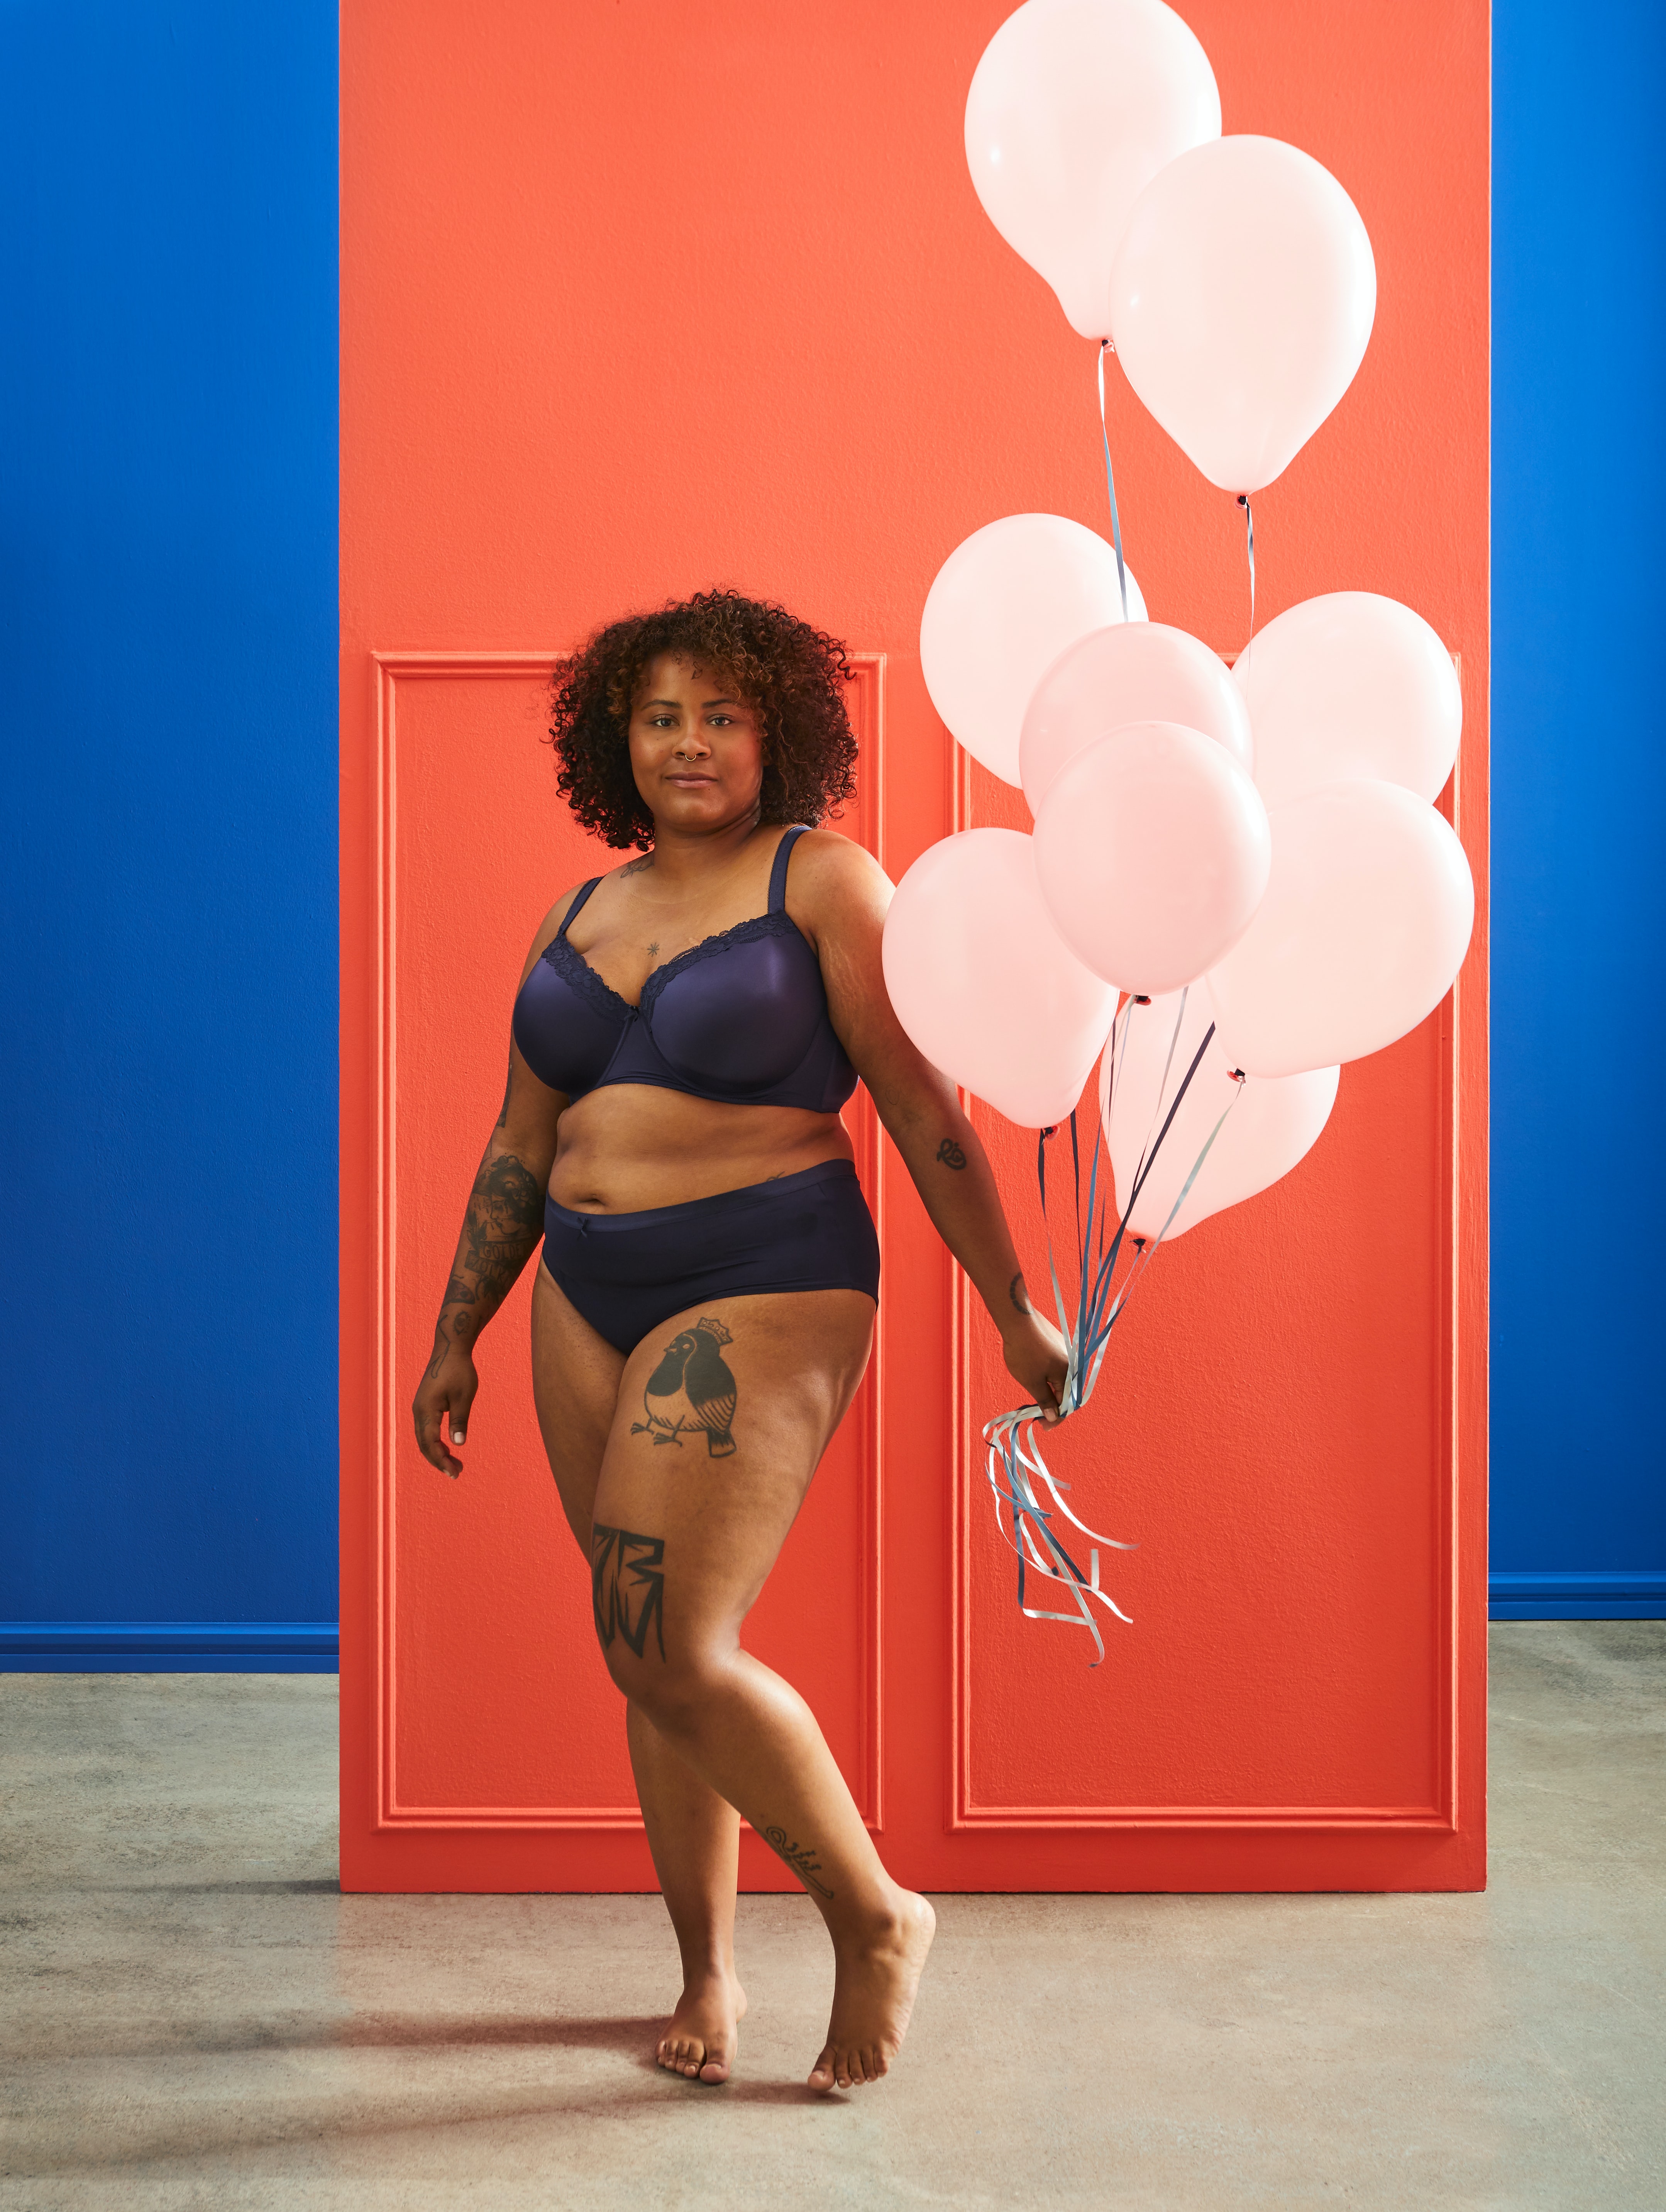 Instagram vs. Reality: Body Positivity through the Lens of Diverse Audiences